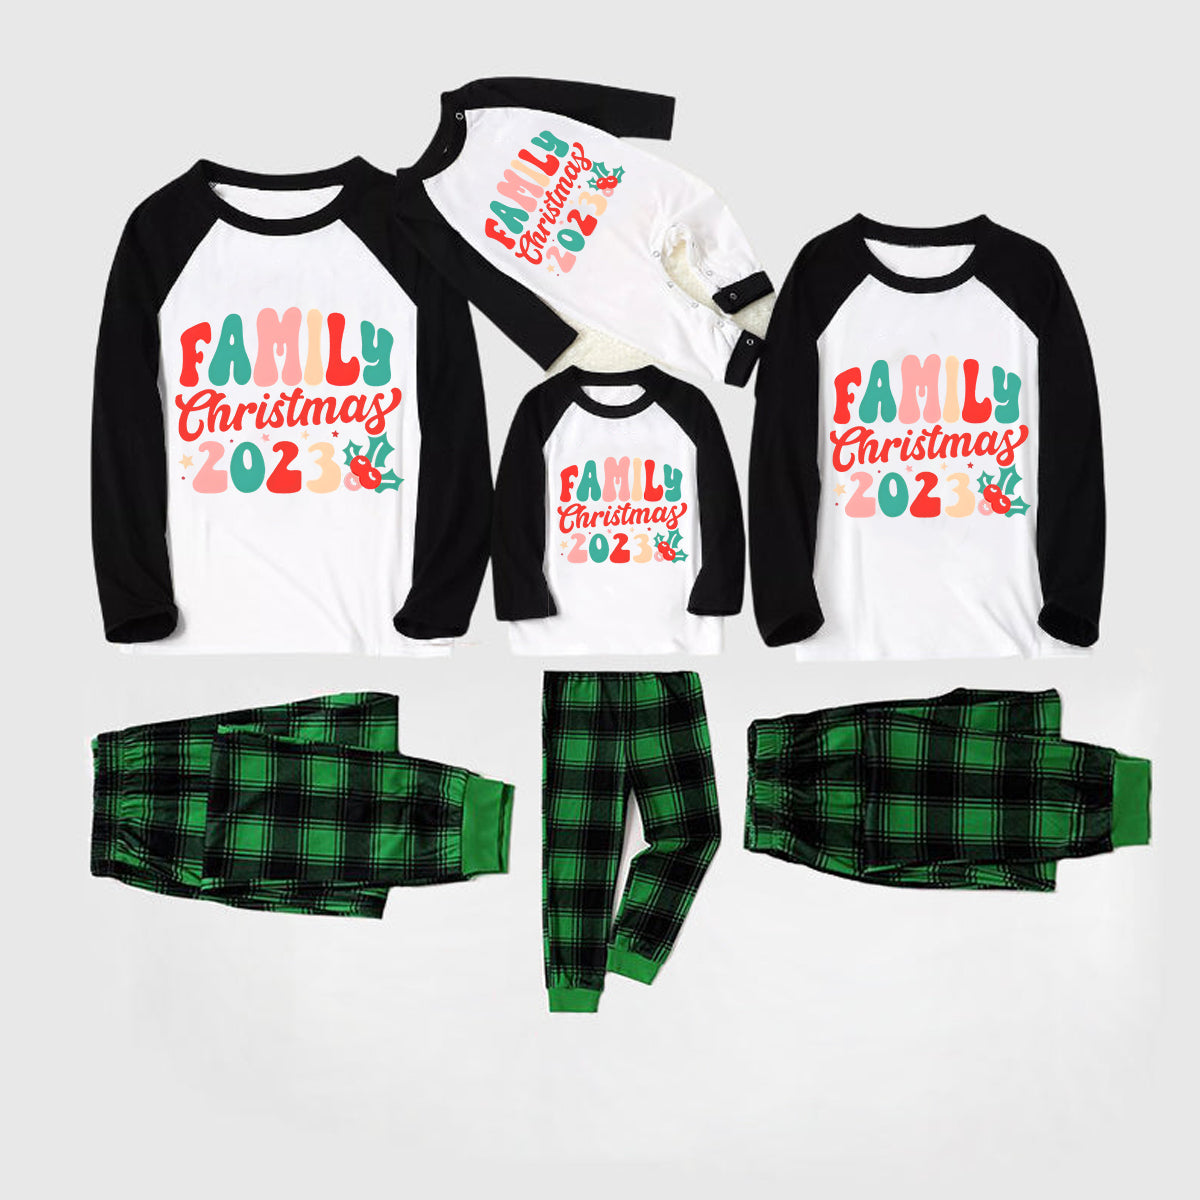 Christmas ‘ Family Christmas 2023’ Letter Print Patterned Casual Long Sleeve Sweatshirts Black Contrast Top and Black and Green Plaid Pants Family Matching Pajamas Sets With Dog Bandana